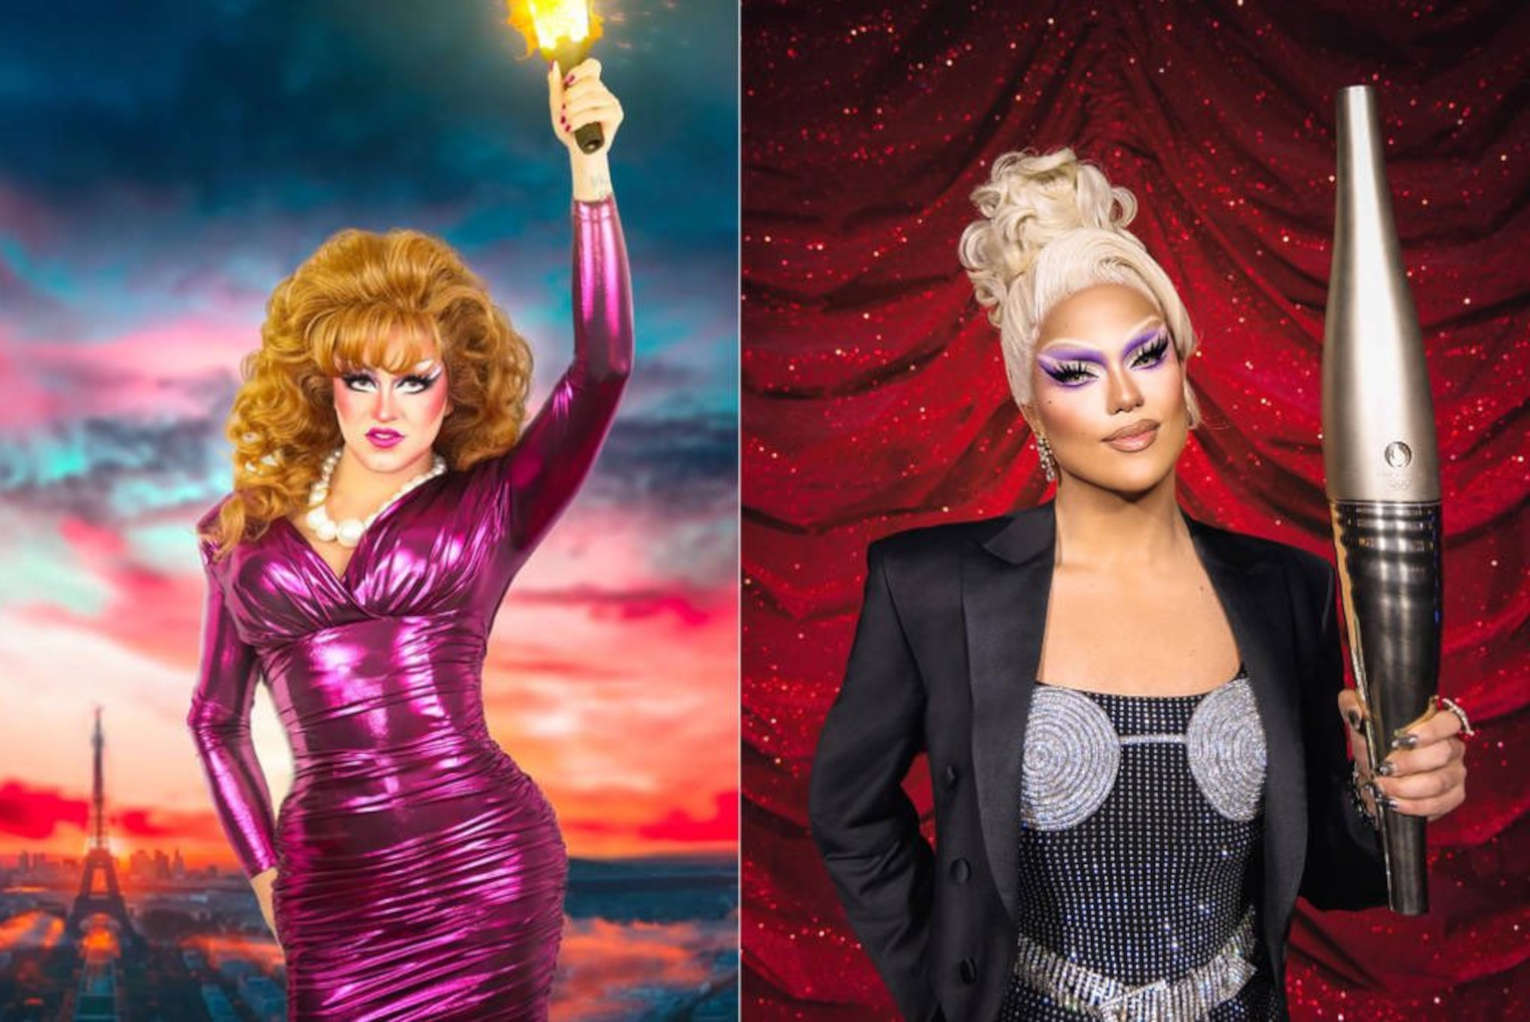 French Drag Queens Selected to Carry Olympic Torch